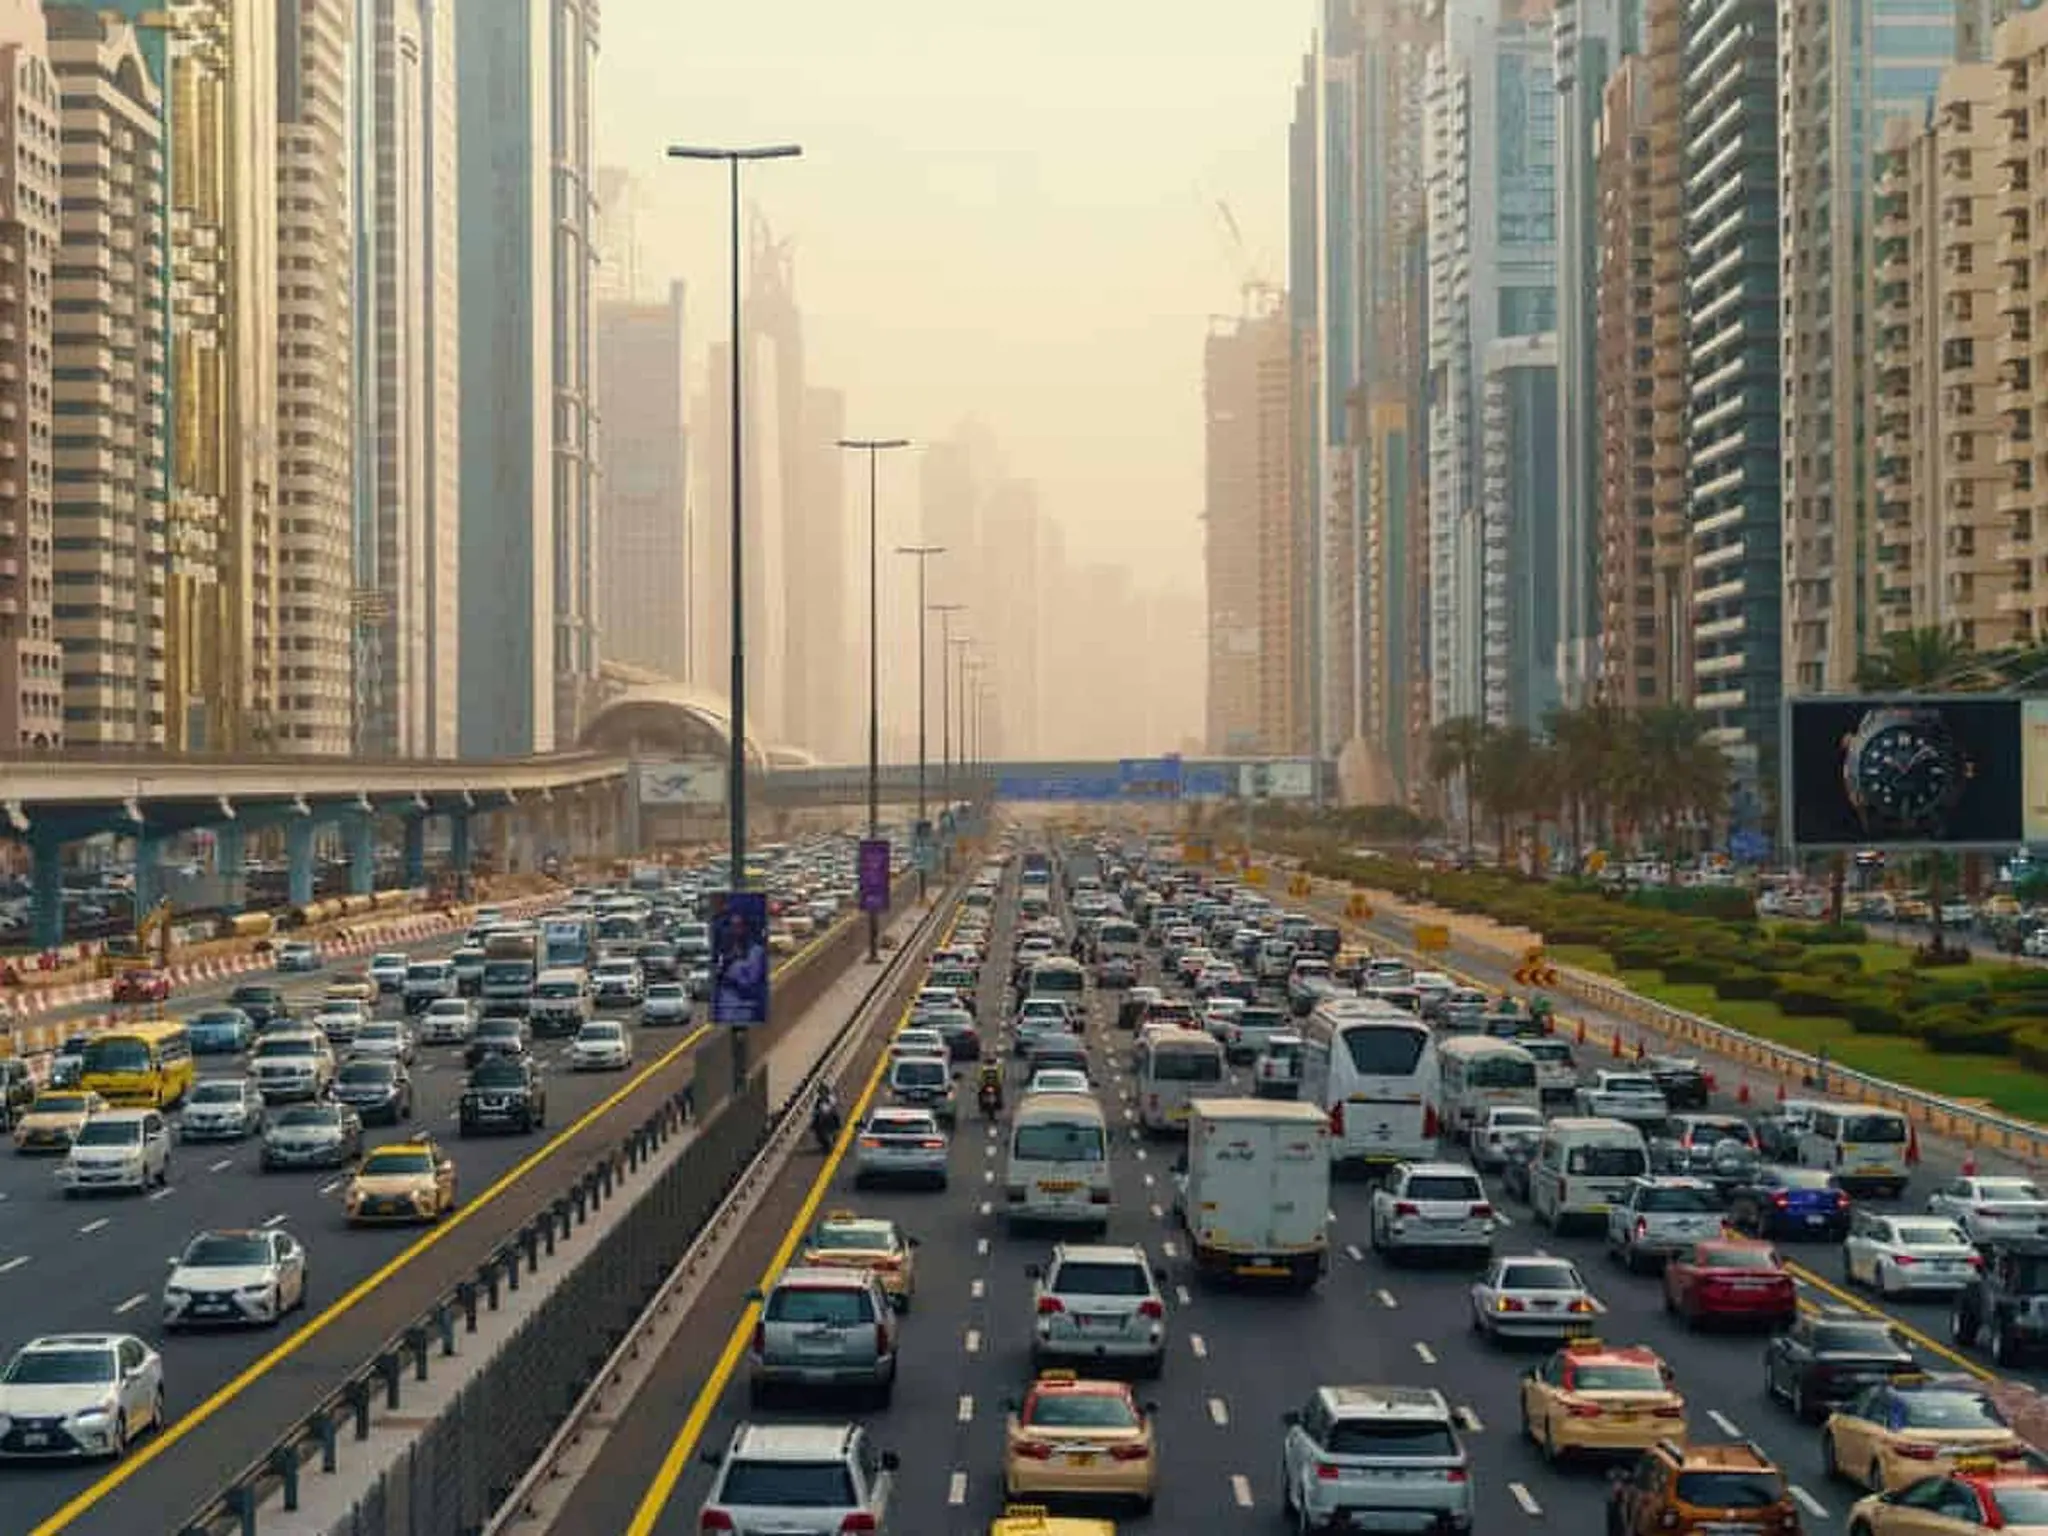 The Roads and Transport Authority issued a traffic alert to drivers in Dubai